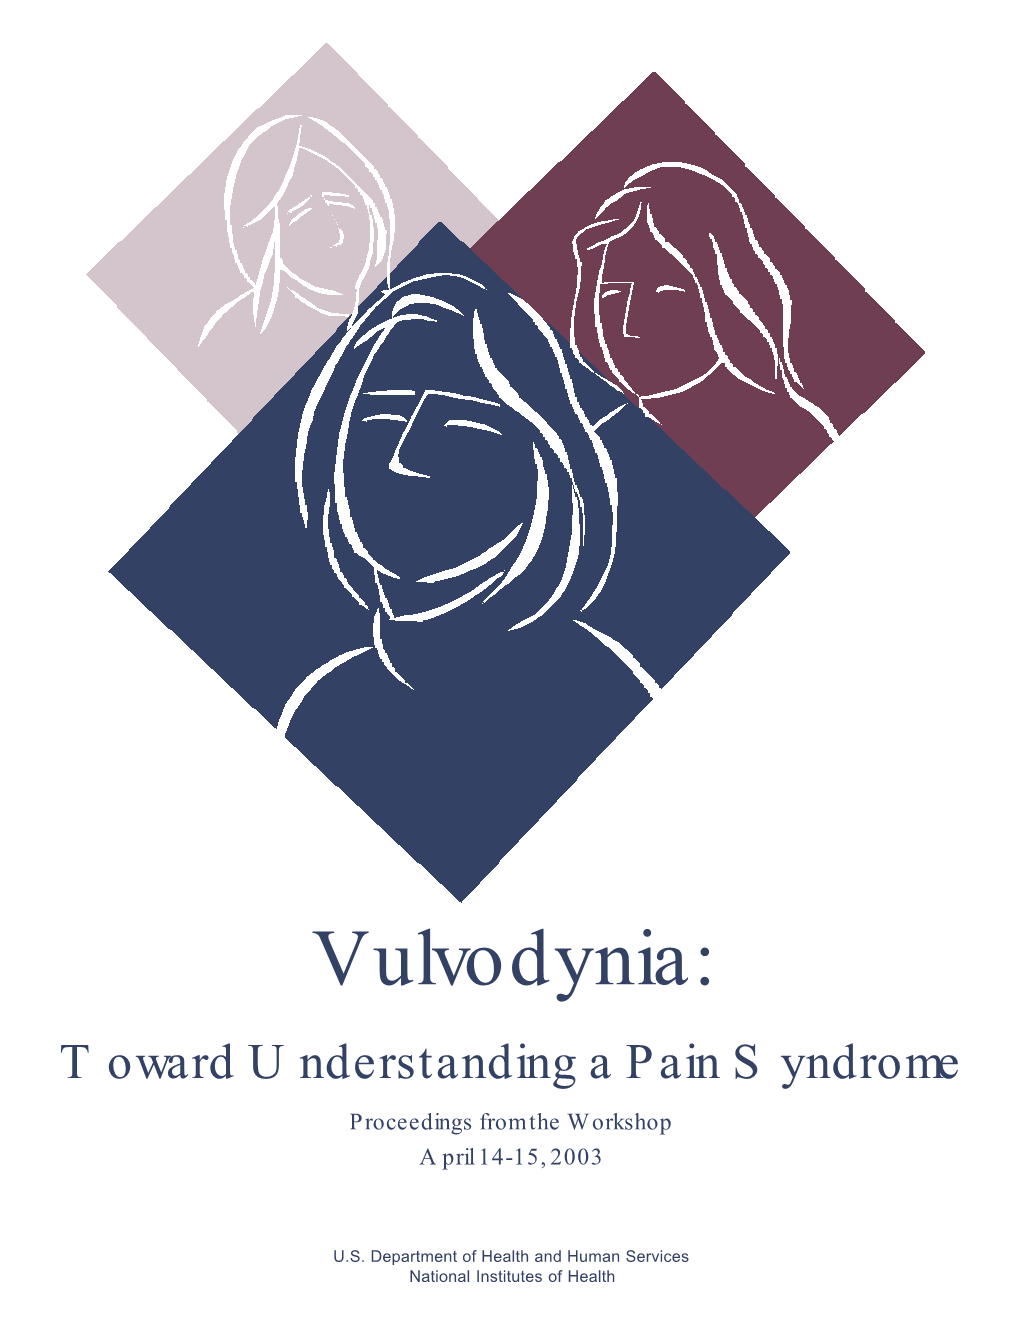 Vulvodynia: Toward Understanding a Pain Syndrome Proceedings from the Workshop April 14-15, 2003